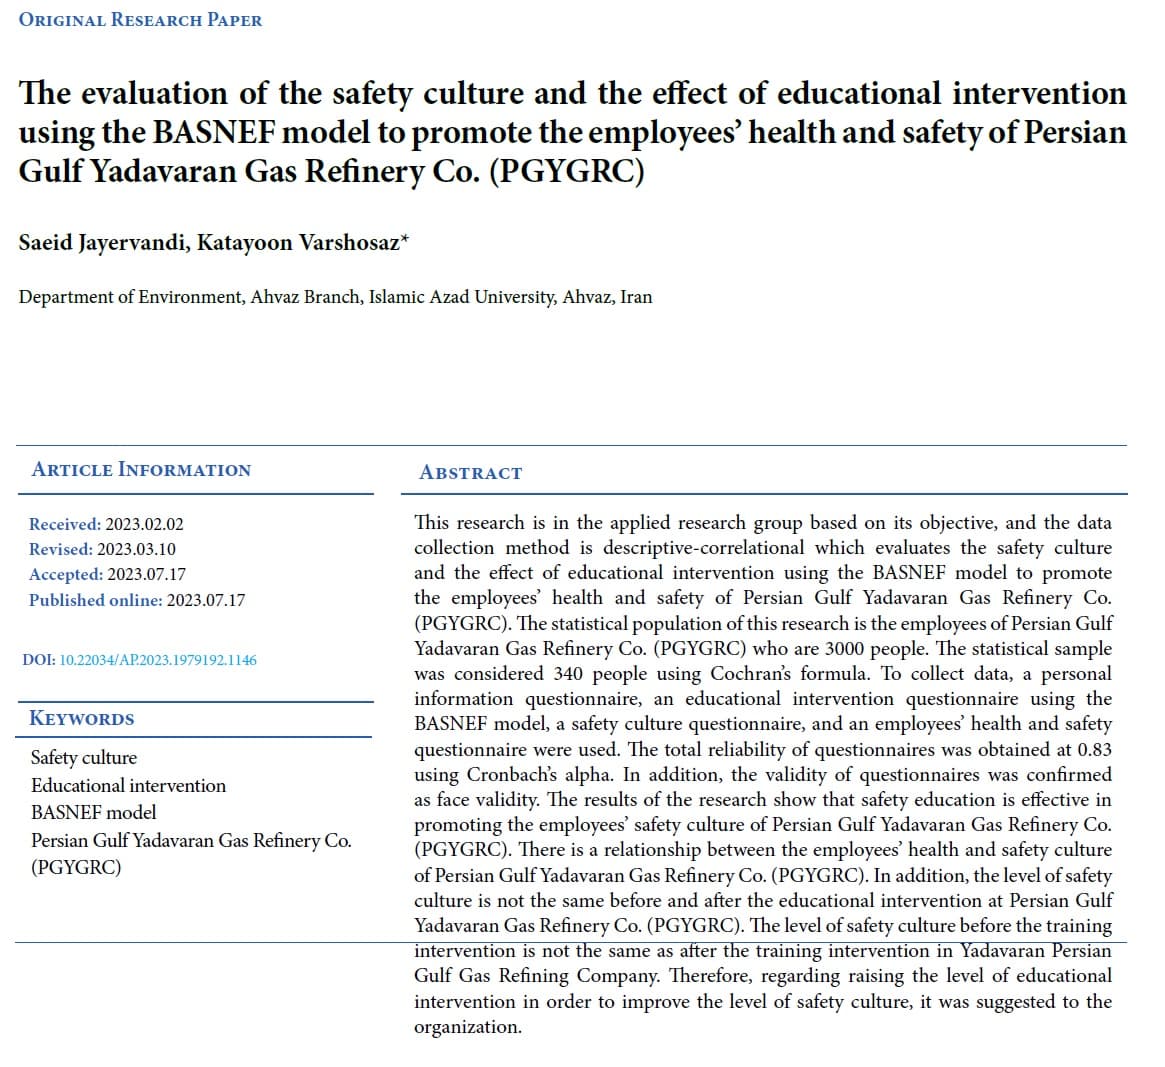 The evaluation of the safety culture and the effect of educational intervention using the BASNEF model to promote the employees’ health and safety of Persian Gulf Yadavaran Gas Refinery Co. (PGYGRC)